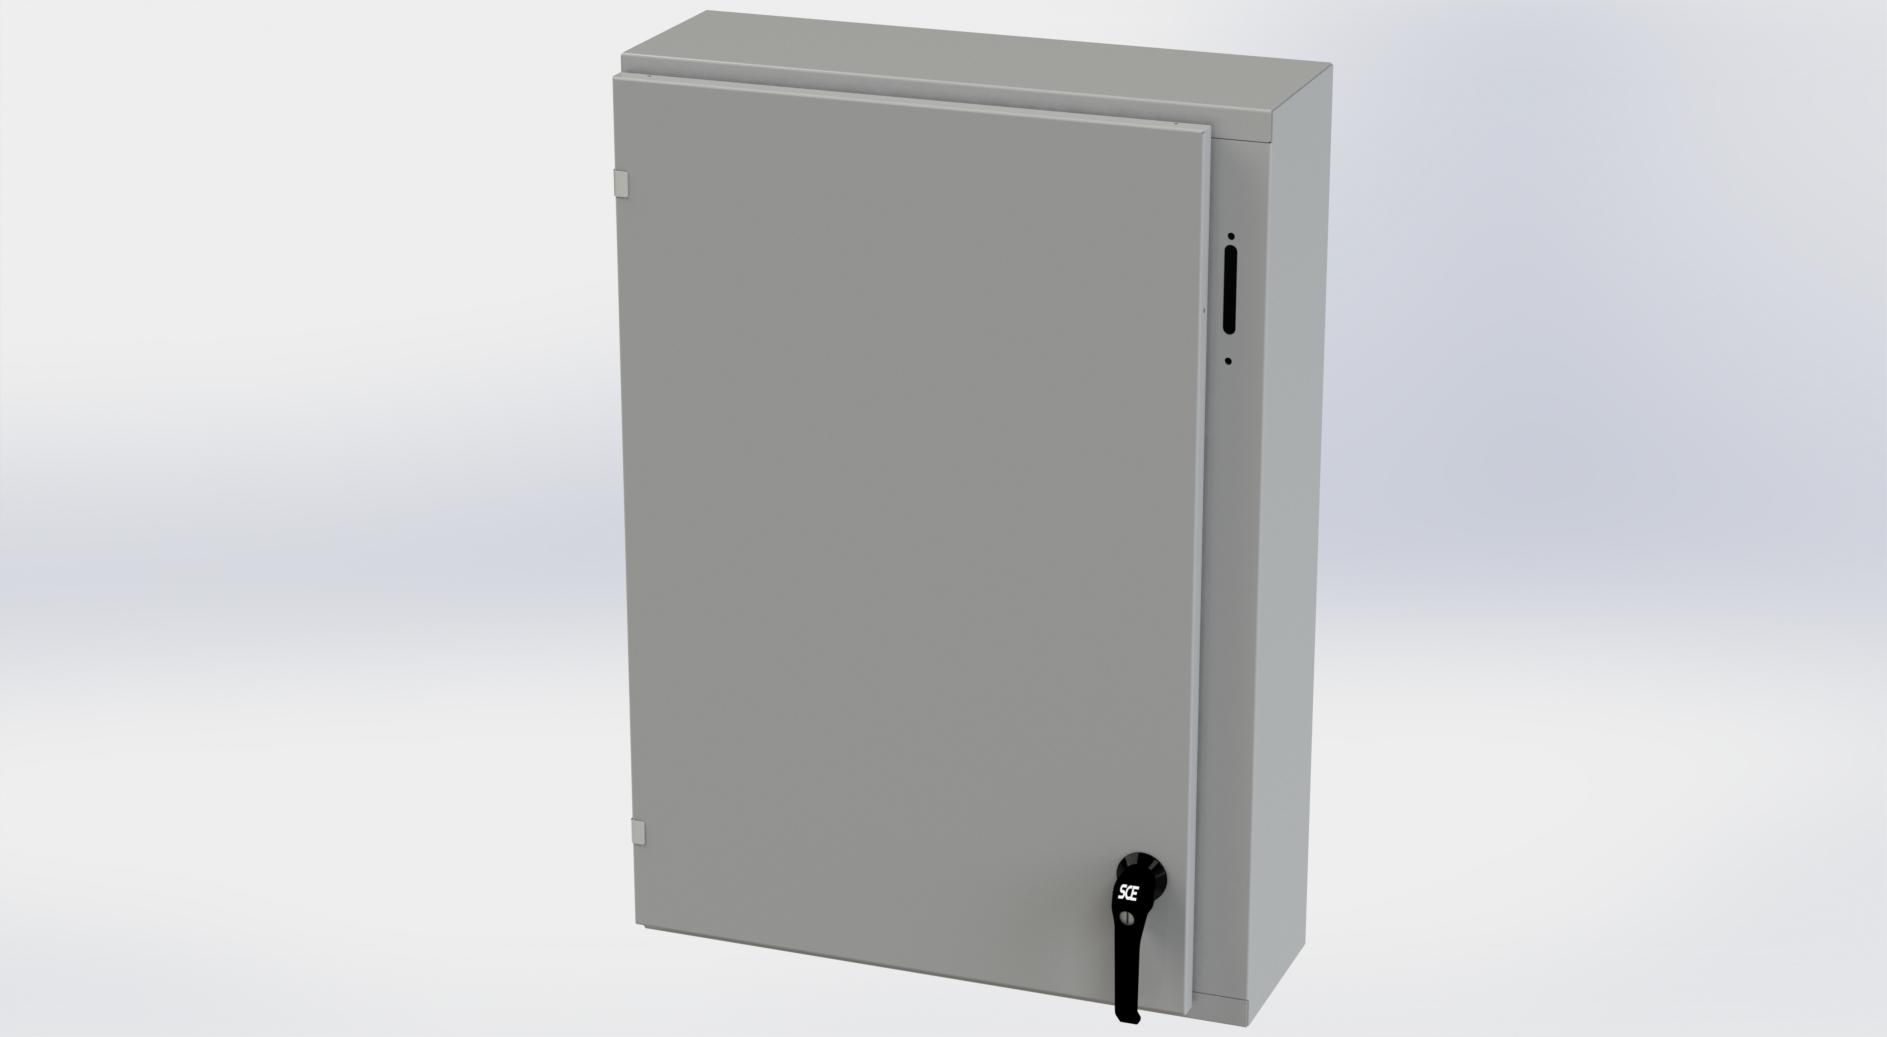 Saginaw Control SCE-36XEL2508LP XEL LP Enclosure, Height:36.00", Width:25.38", Depth:8.00", ANSI-61 gray powder coating inside and out. Optional sub-panels are powder coated white.